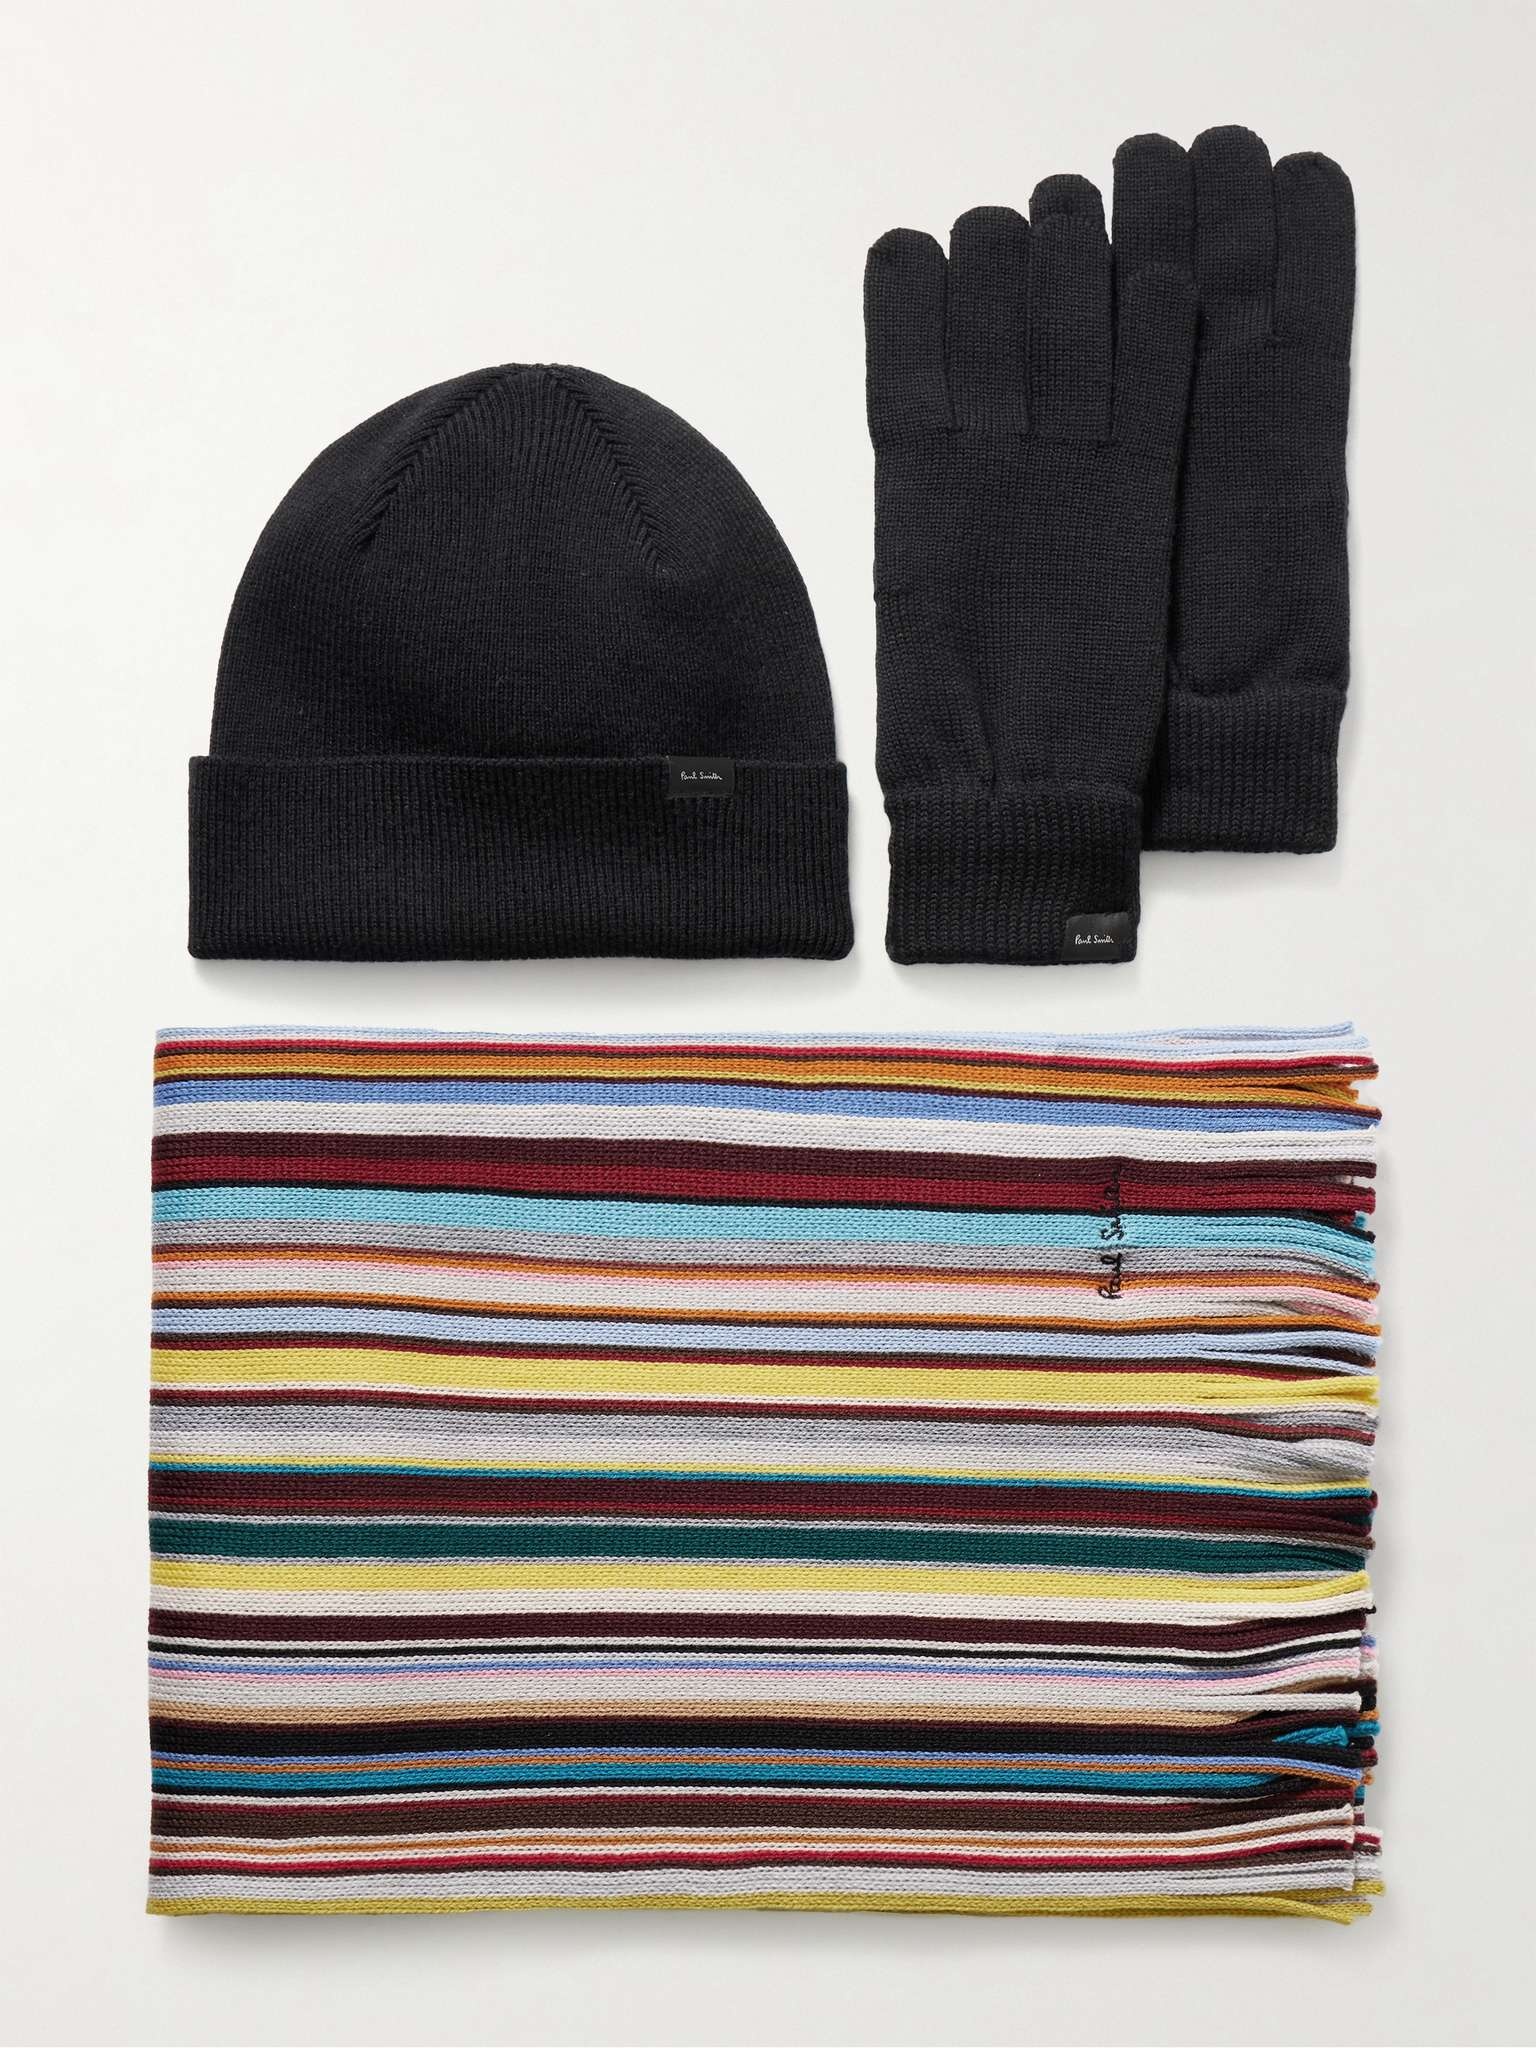 Wool Scarf, Beanie and Gloves Set - 1